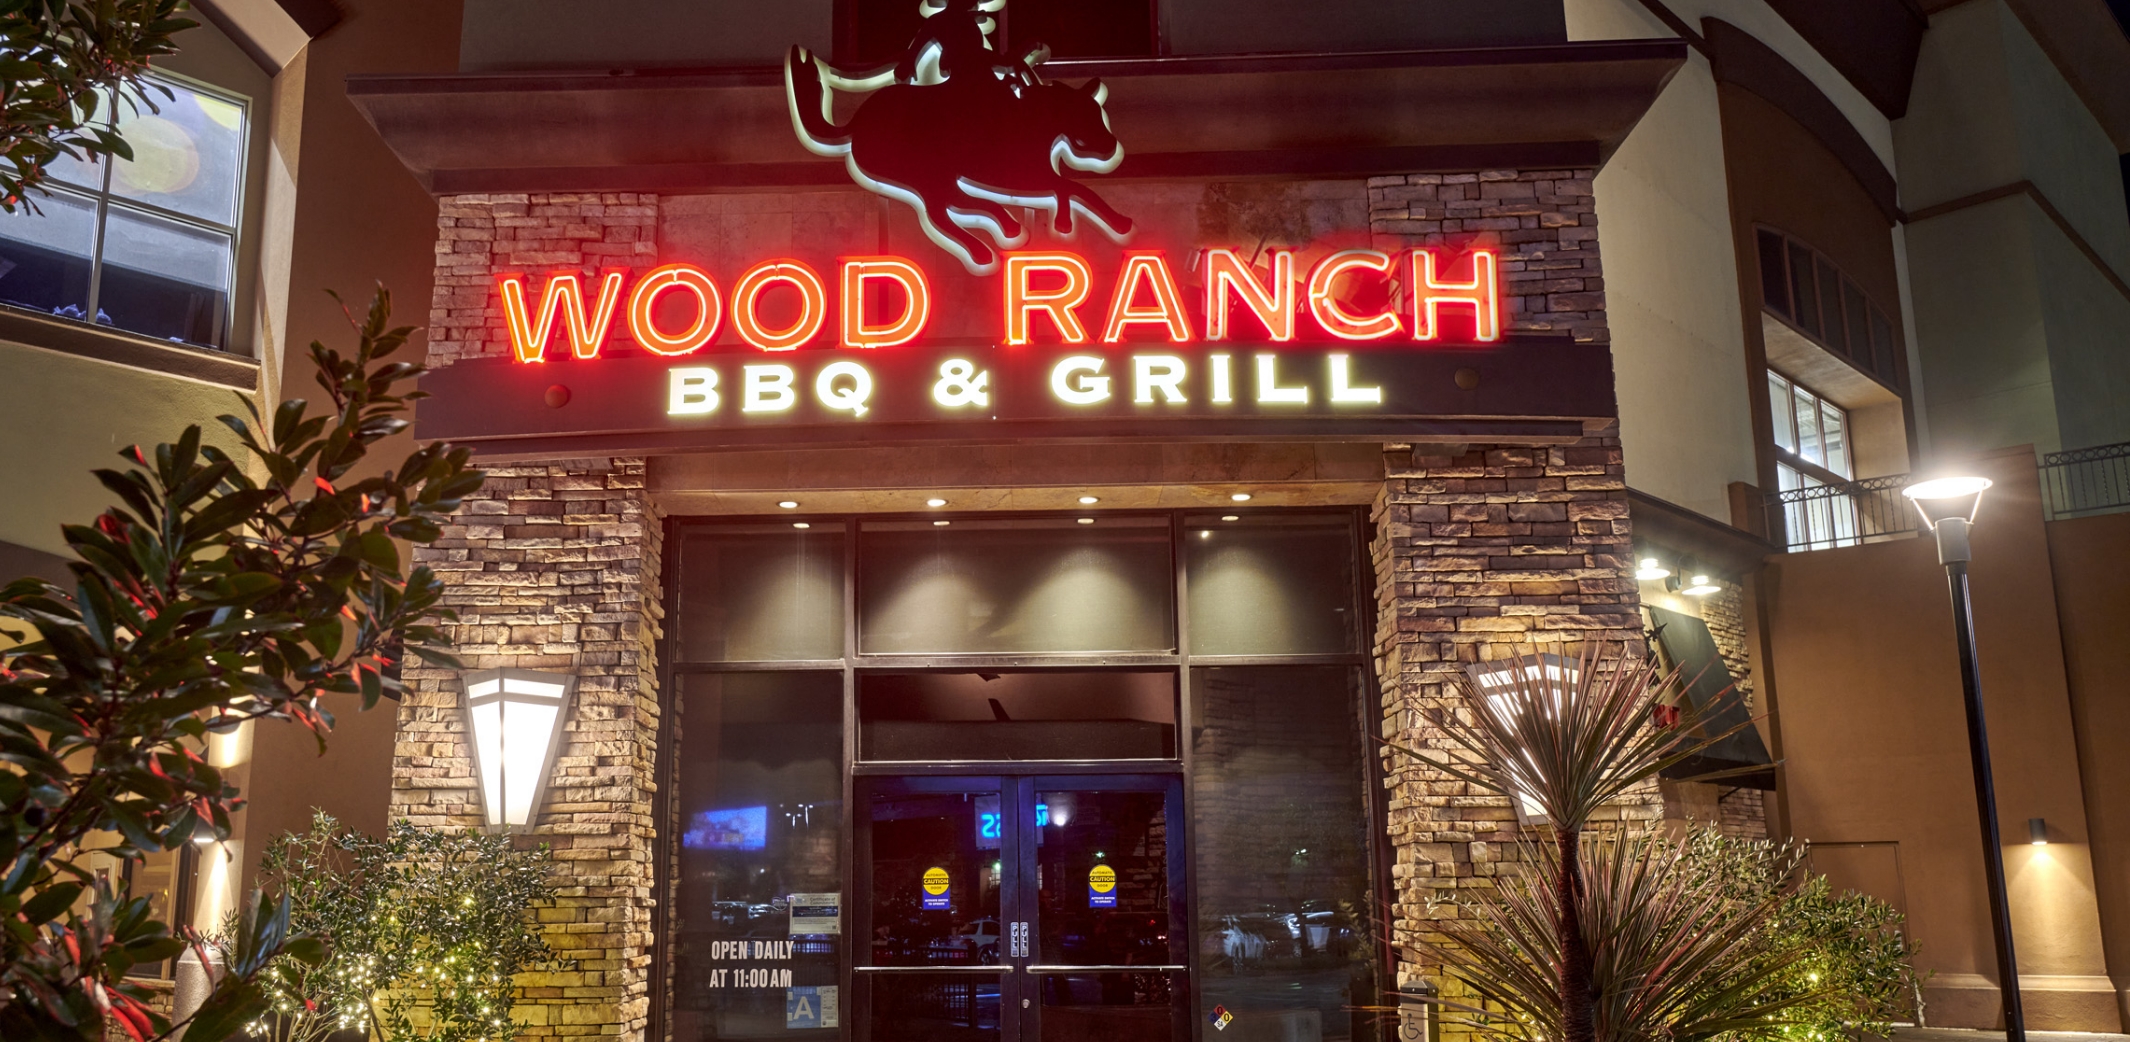 The front view of Wood Ranch BBQ & Grill at Northridge during evening hours, featuring the iconic neon-lit sign and modern architecture, with guests entering and exiting the restaurant.